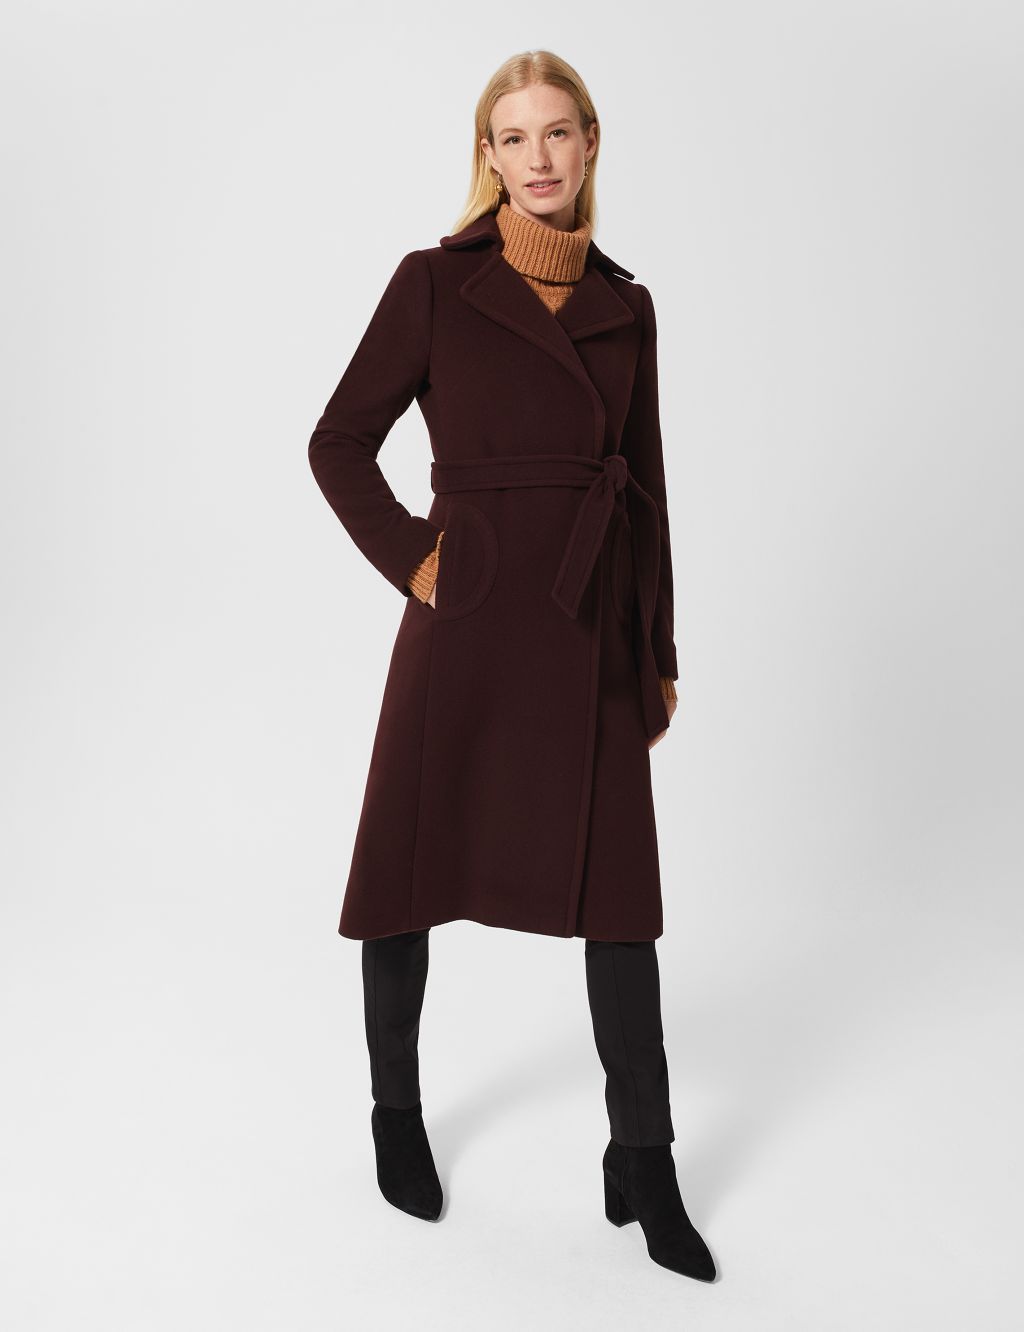 Wool Rich Collared Wrap Coat image 1